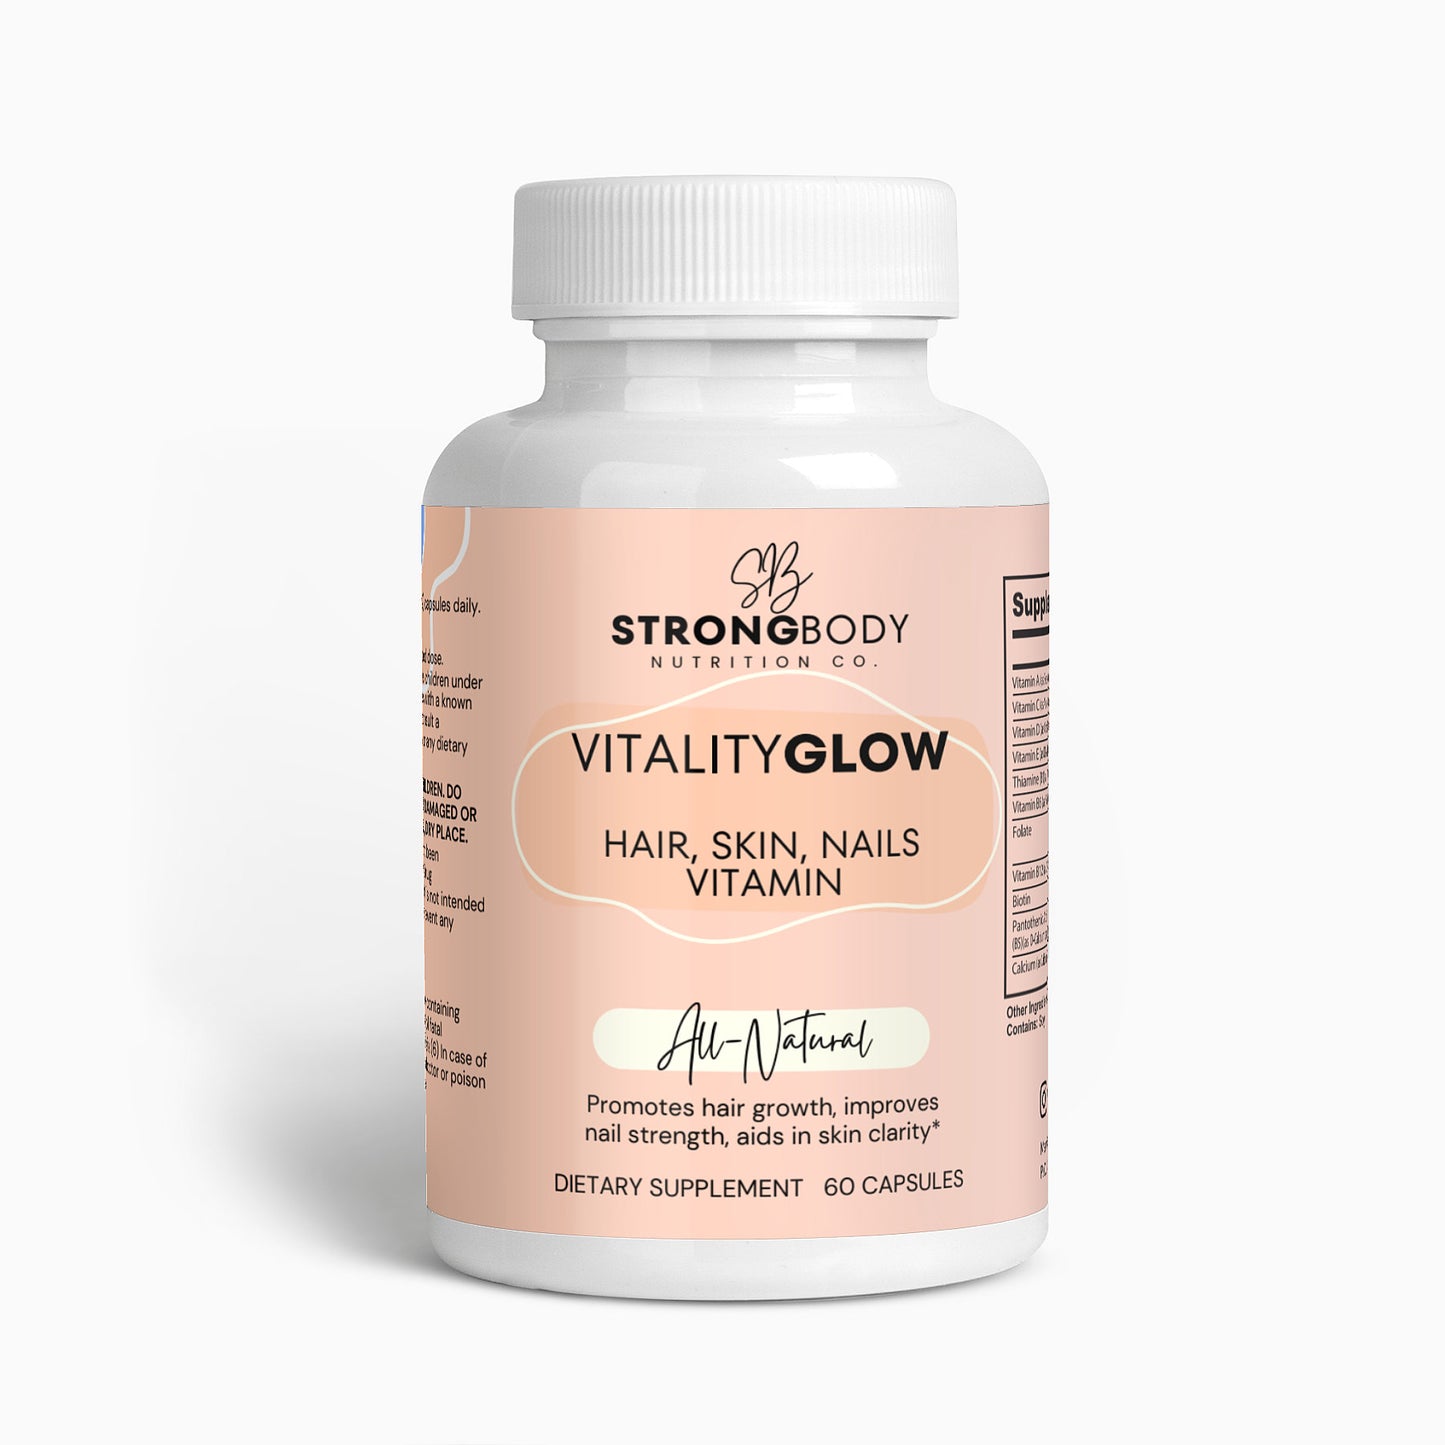 VitalityGlow Hair, Skin and Nails Supplement